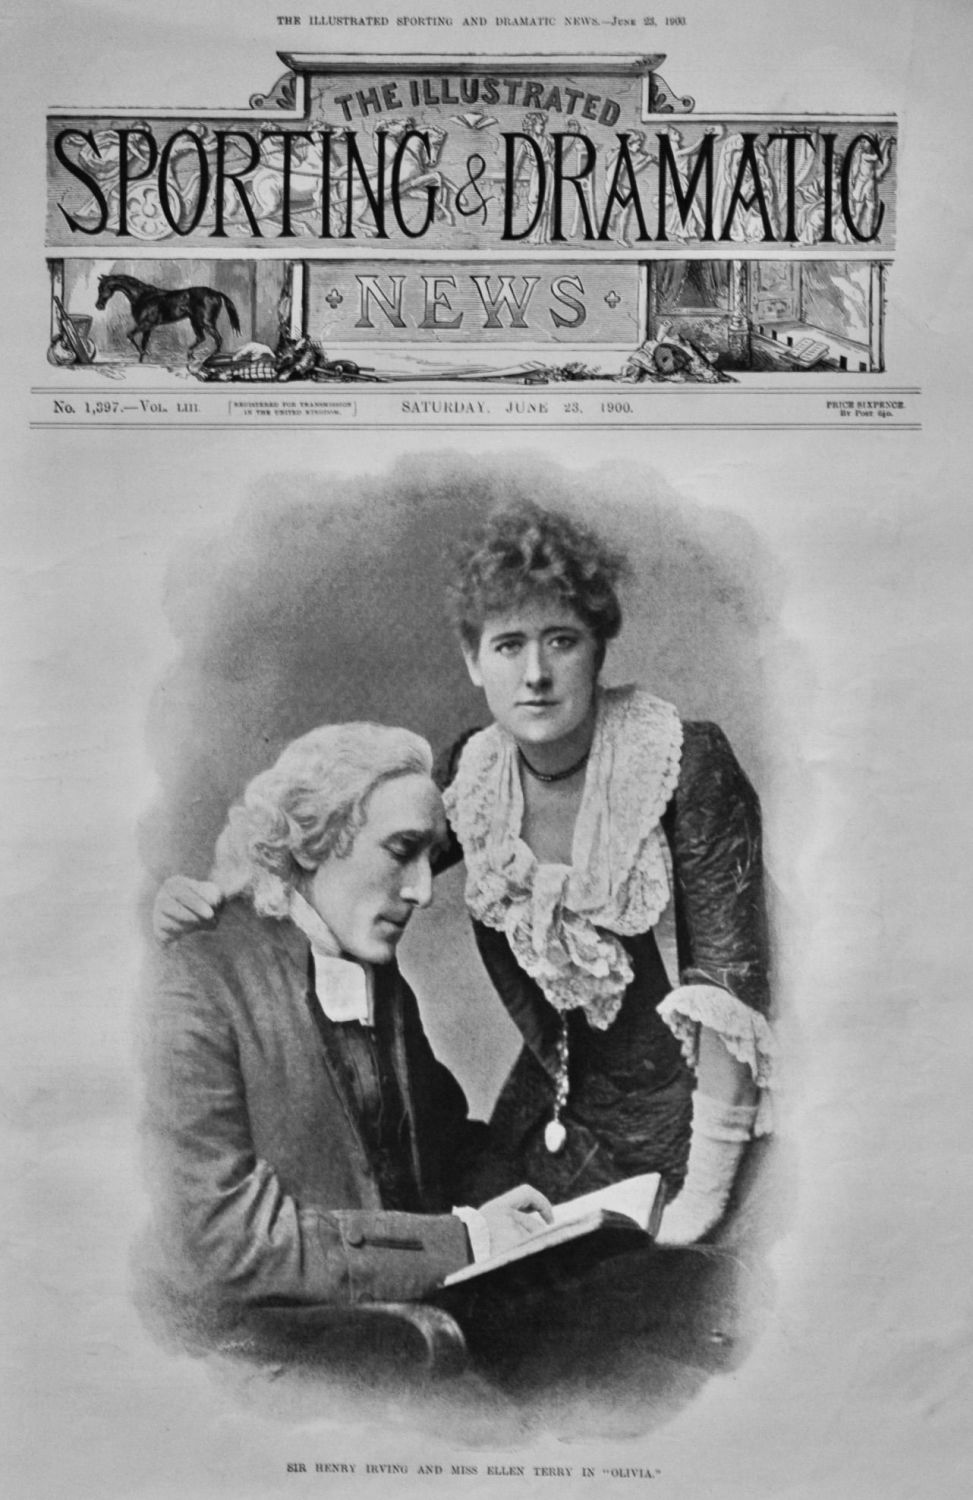 Sir Henry Irving and Miss Ellen Terry in 